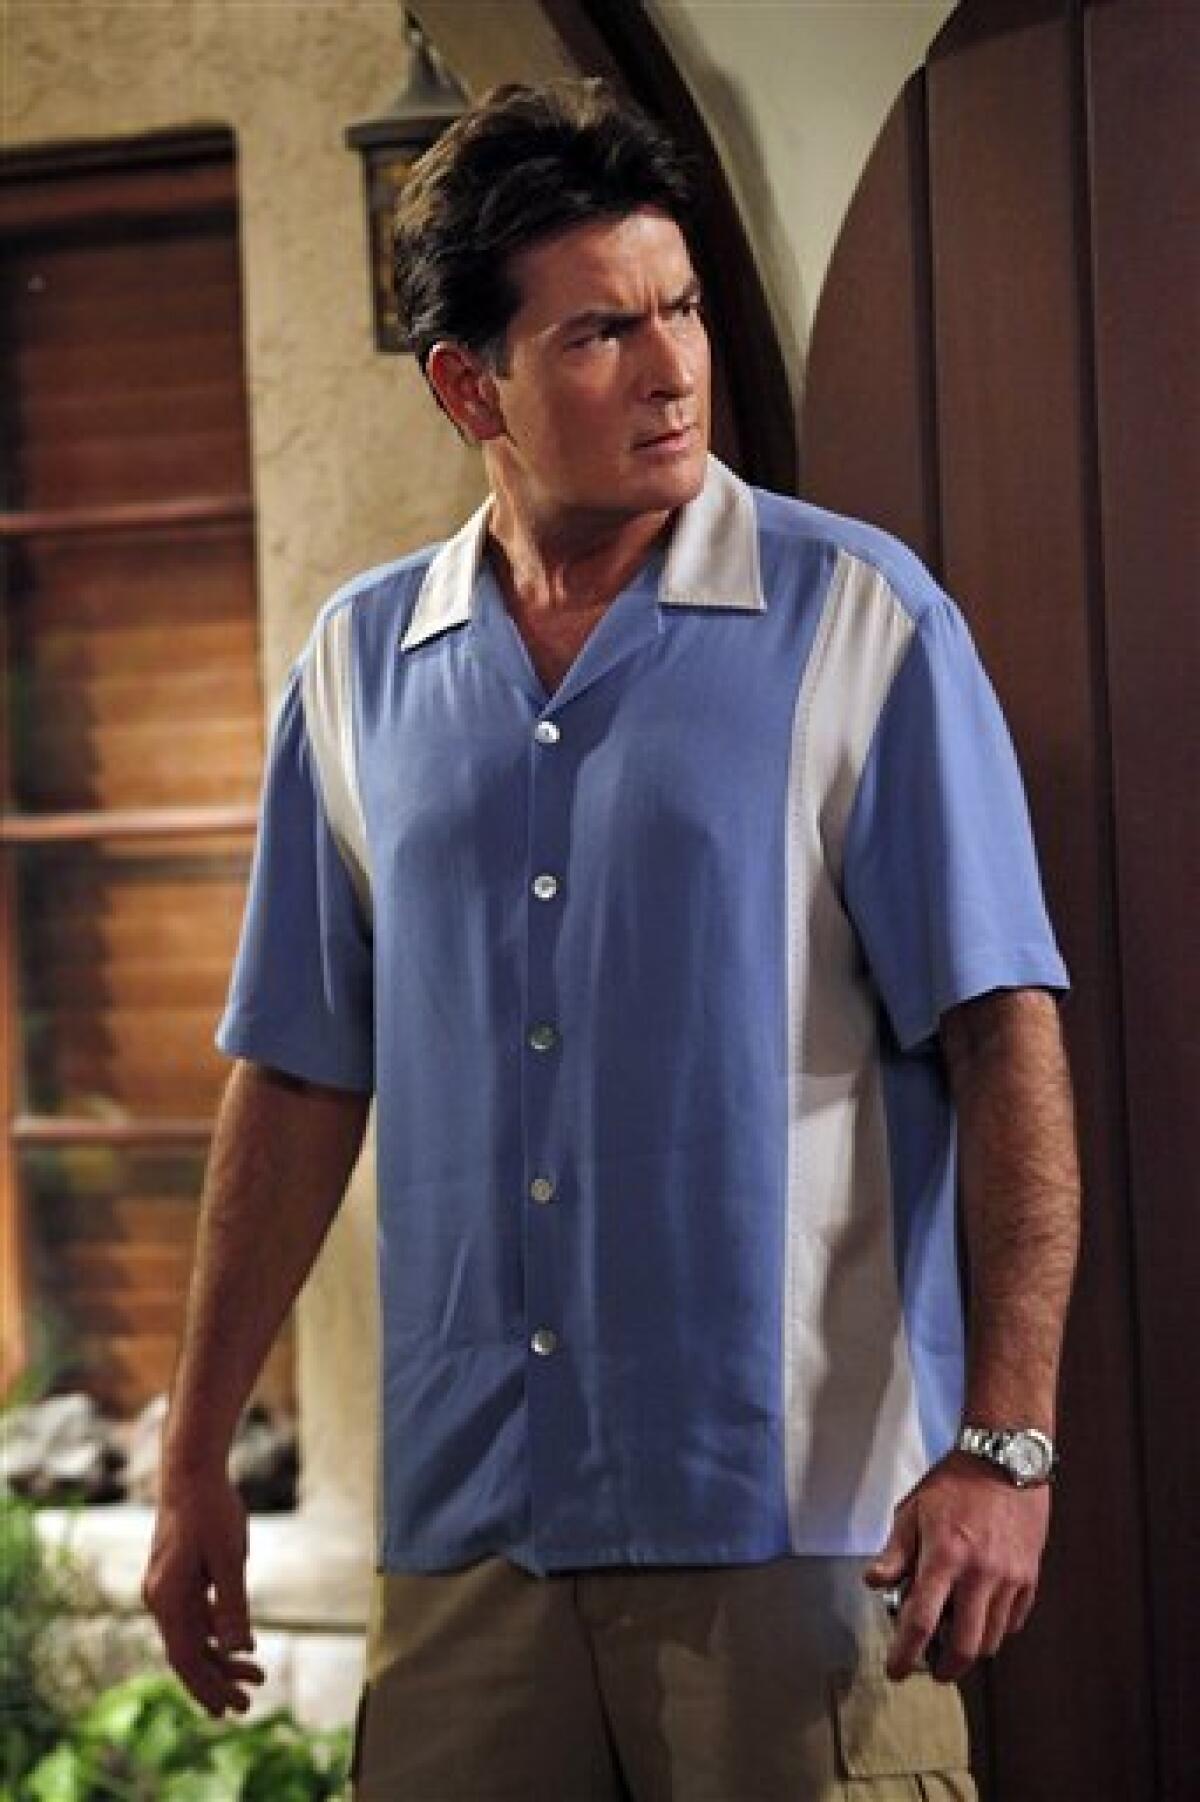 FILE - In this file image released by CBS, Charlie Sheen is shown in a scene from the CBS comedy, "Two and a Half Men." Sheen is looking at a future without "Two and a Half Men." Sheen's desire to exit the sitcom was reported by People magazine online Thursday April 1, 2010. (AP Photo/CBS, Greg Gayne, File) MANDATORY CREDIT; NO ARCHIVE; NO SALES; NORTH AMERICA USE ONLY